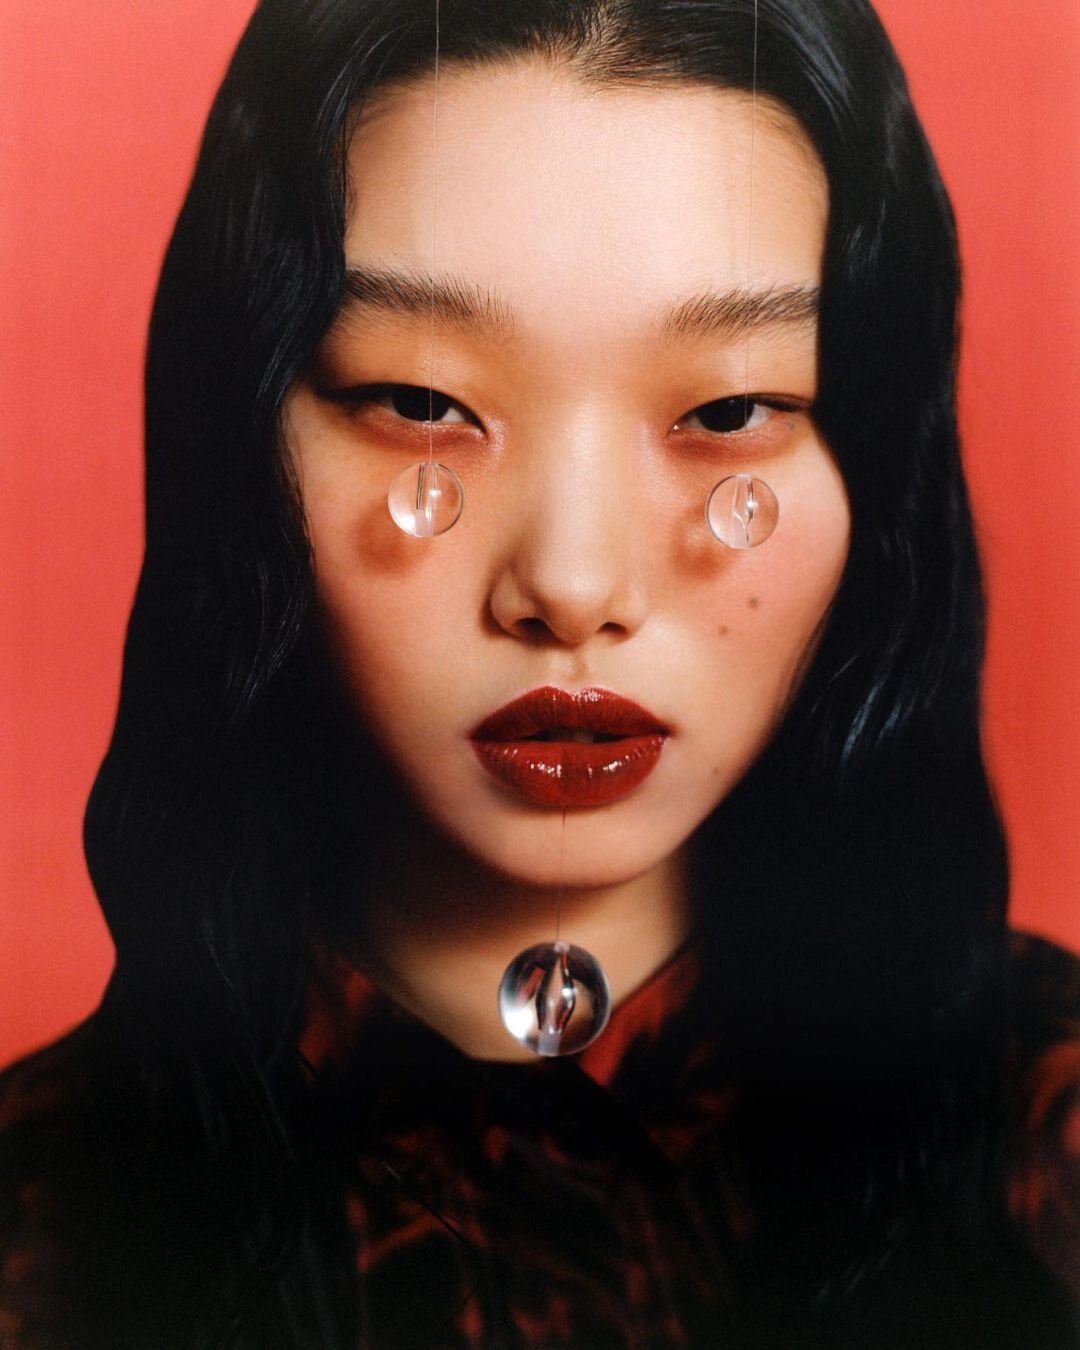 Yoon Young Bae in 'Synthesized Vision' by Peter Ash Lee for Vogue Hong Kong  August 2021 — Anne of Carversville